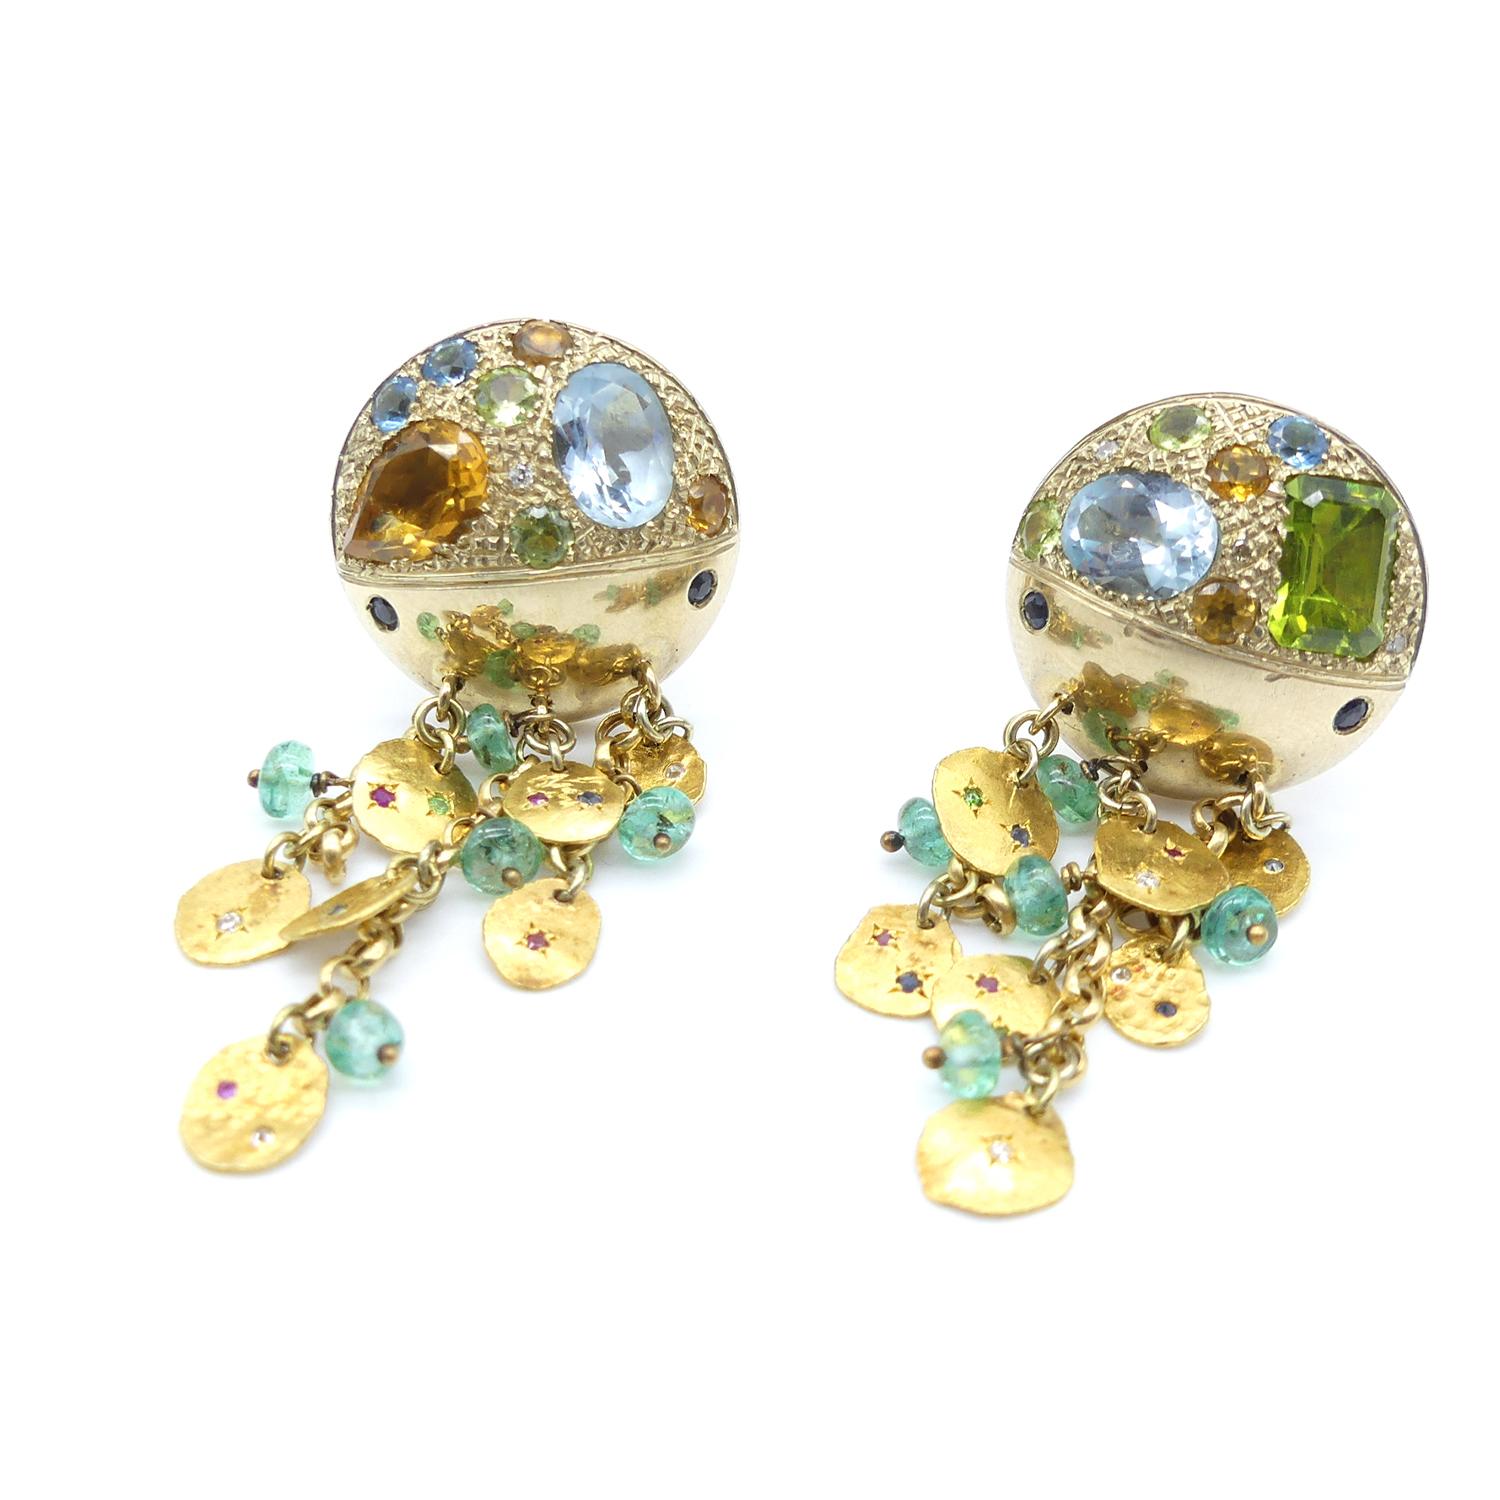 21st Century Topaz Emerald Peridot Ruby Emoji Smile Face Clip on Gold Earrings

Earrings in 18 Karat gold, 24 Karat gold Clip on, oval topaz, smoky quartz, topaz, oval smoky quartz, oval emerald and peridot, rubies, sapphires and 0'1 cts brilliant